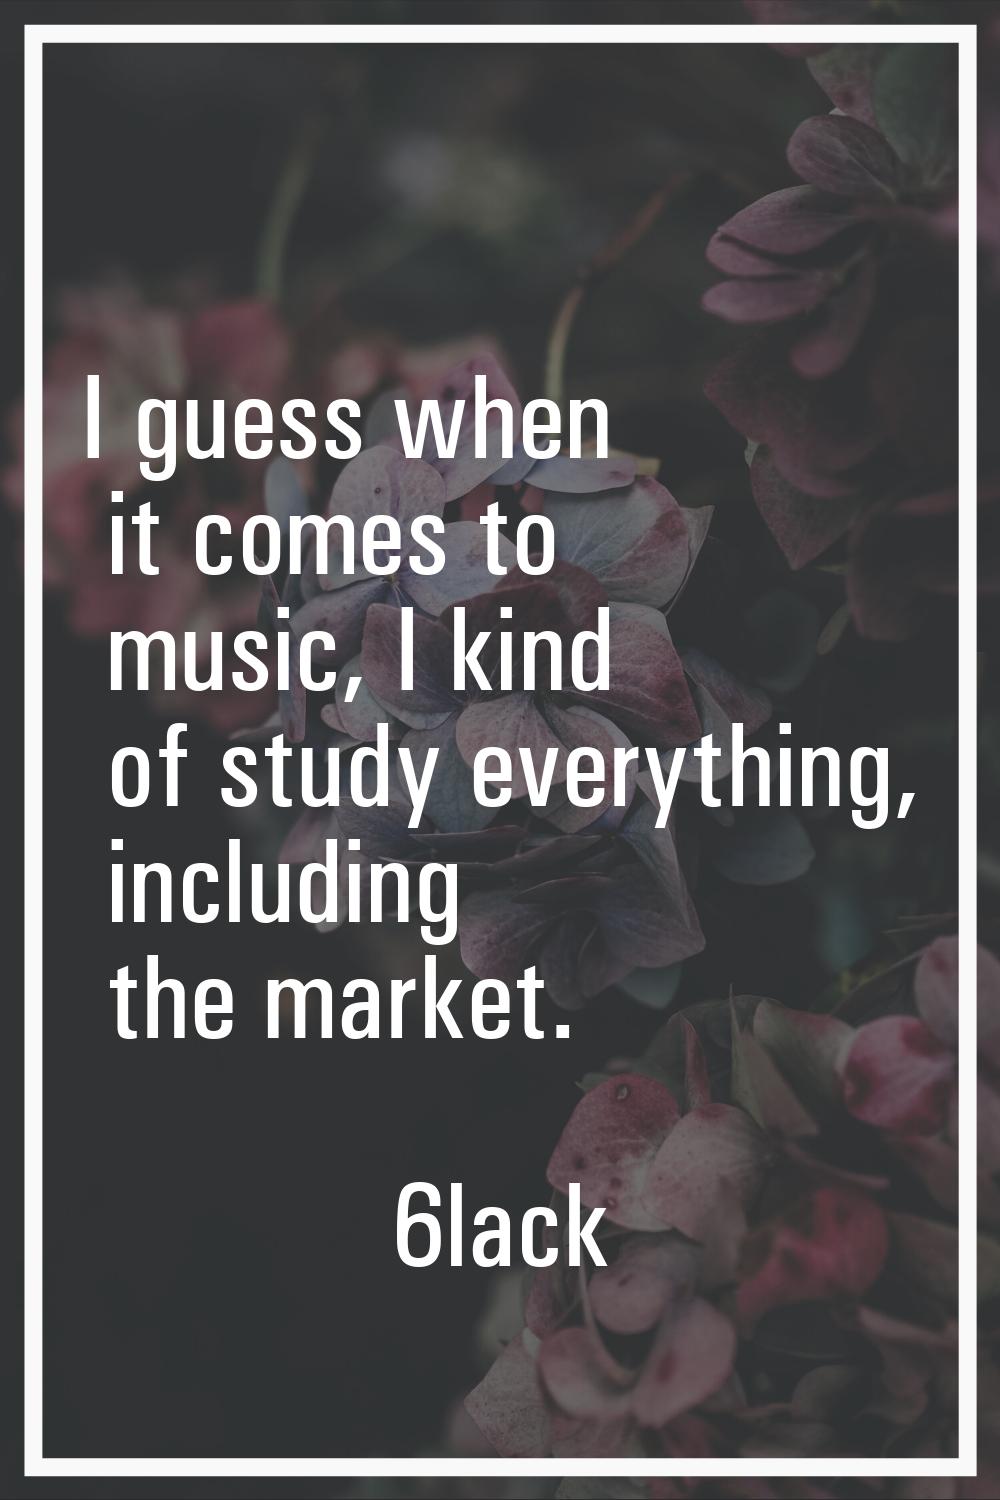 I guess when it comes to music, I kind of study everything, including the market.